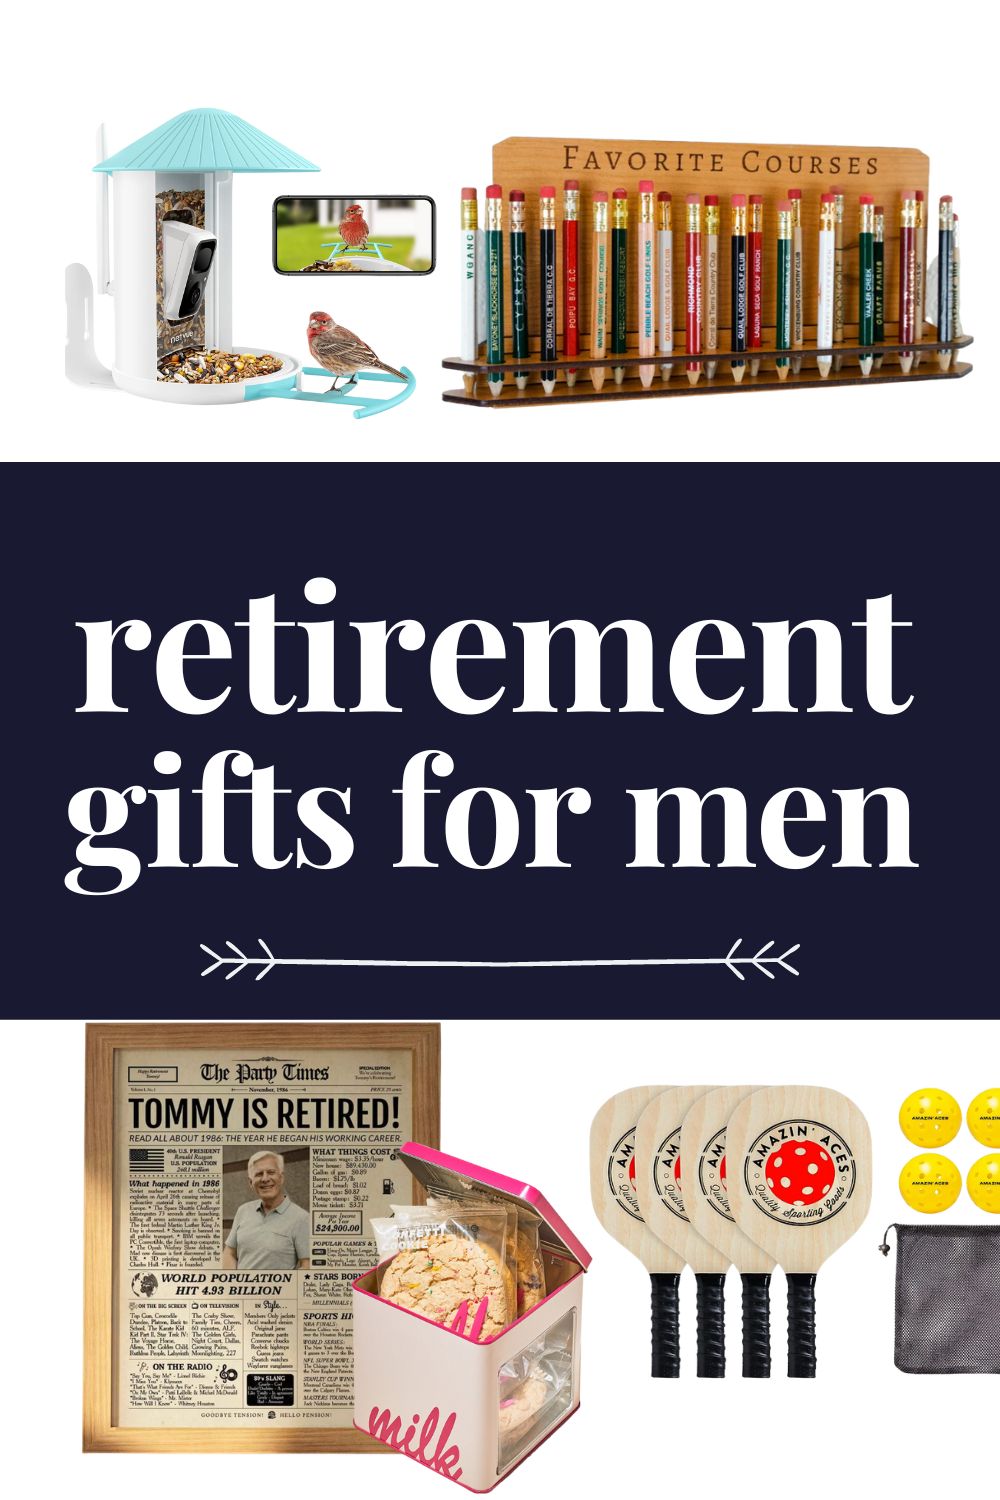 Precious Moments Retirement Gifts – MonCheriDesigns